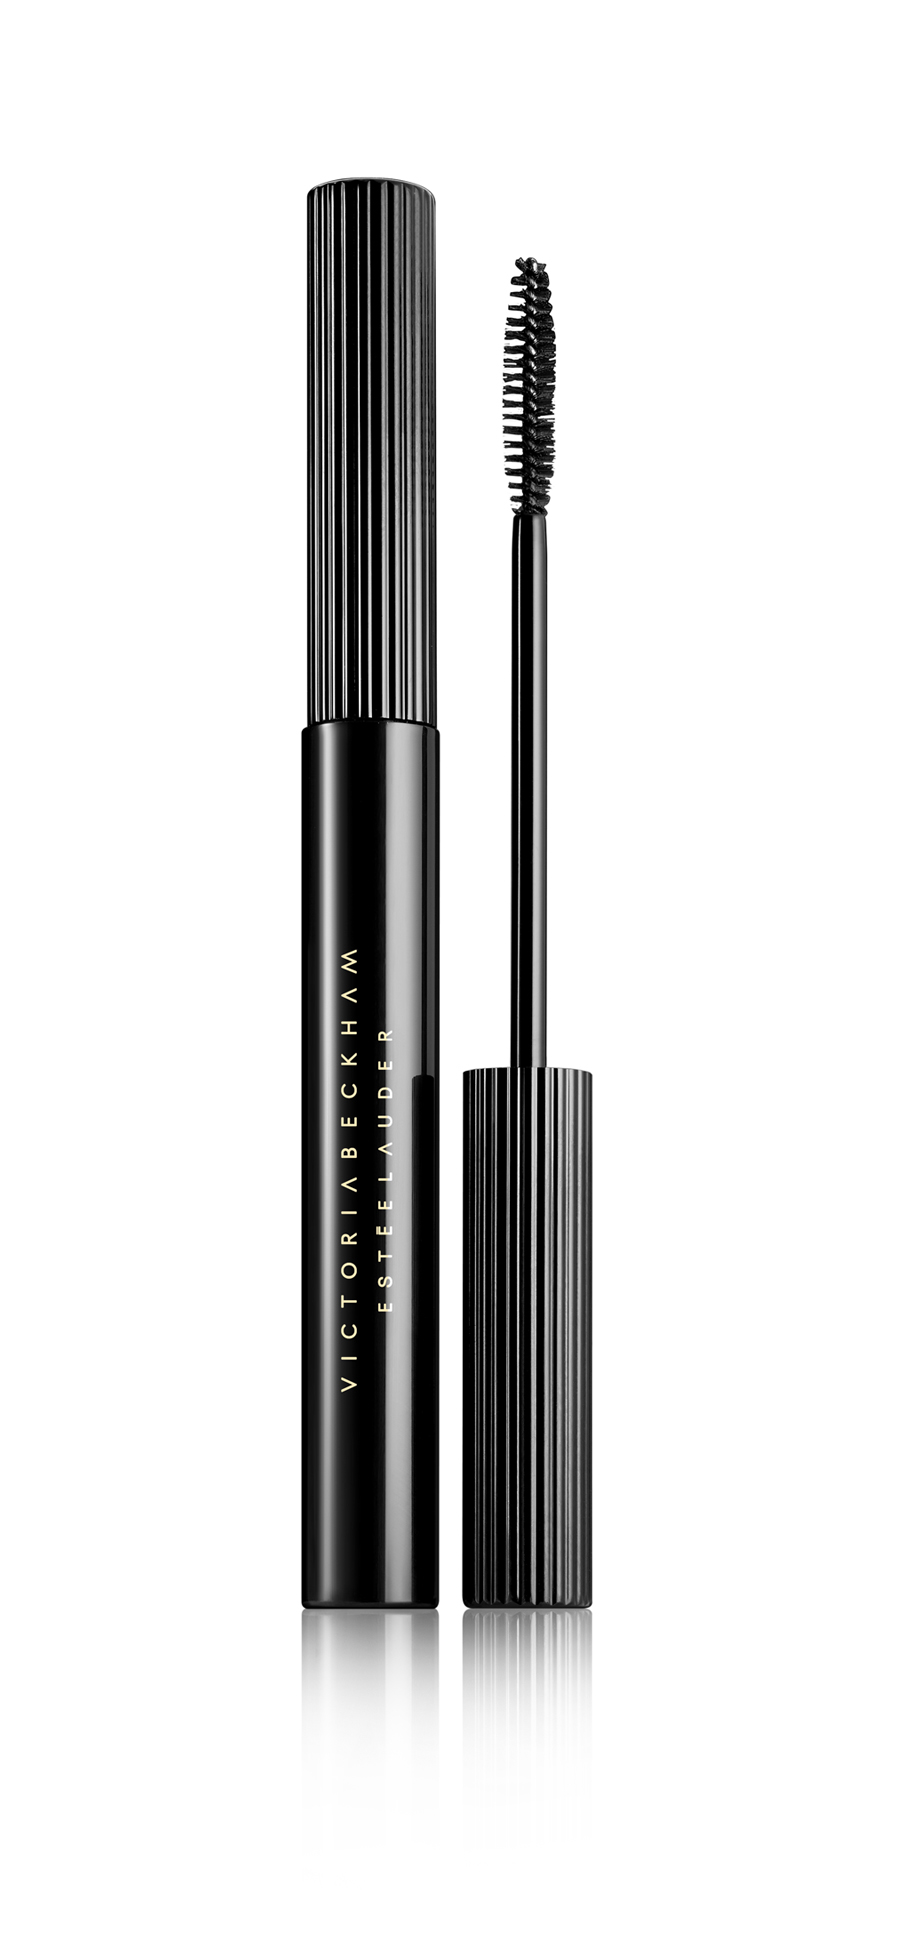 VBxEL_Autumn Winter 17_Eye Ink Mascara in Blackest on White_Global_Use from August 1st to December 2017_FINAL